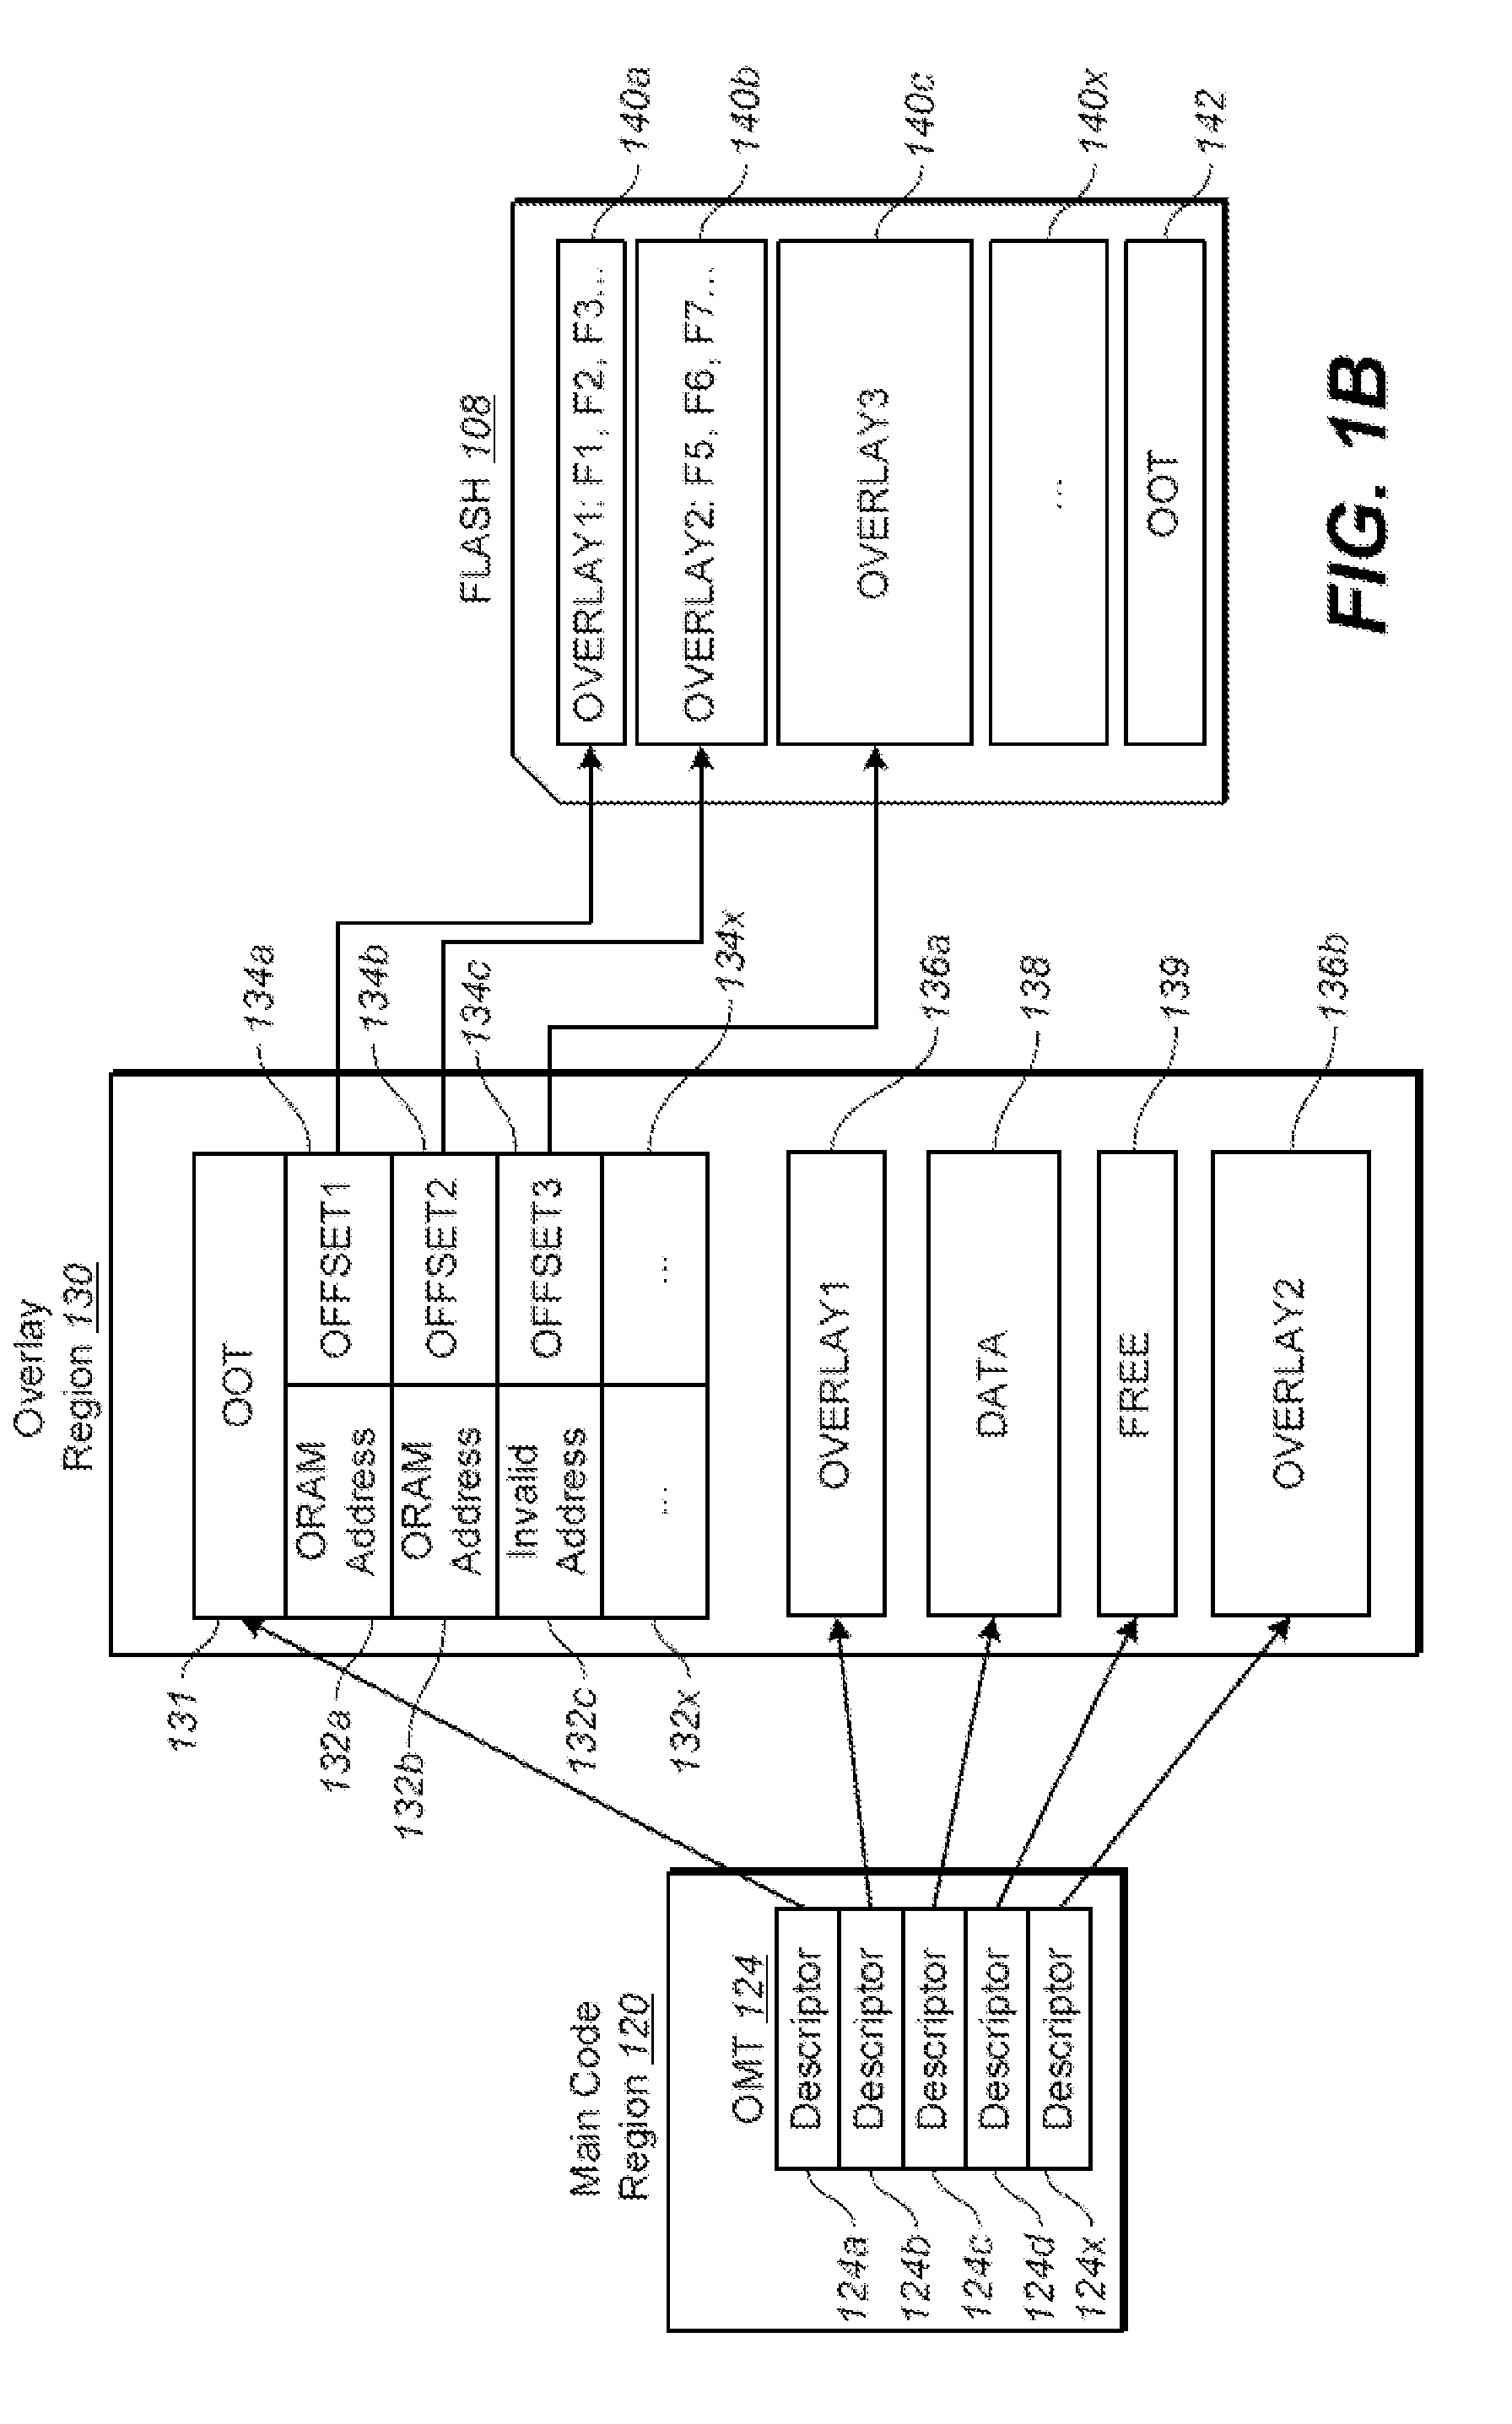 Avoidance of self eviction caused by dynamic memory allocation in a flash memory storage device